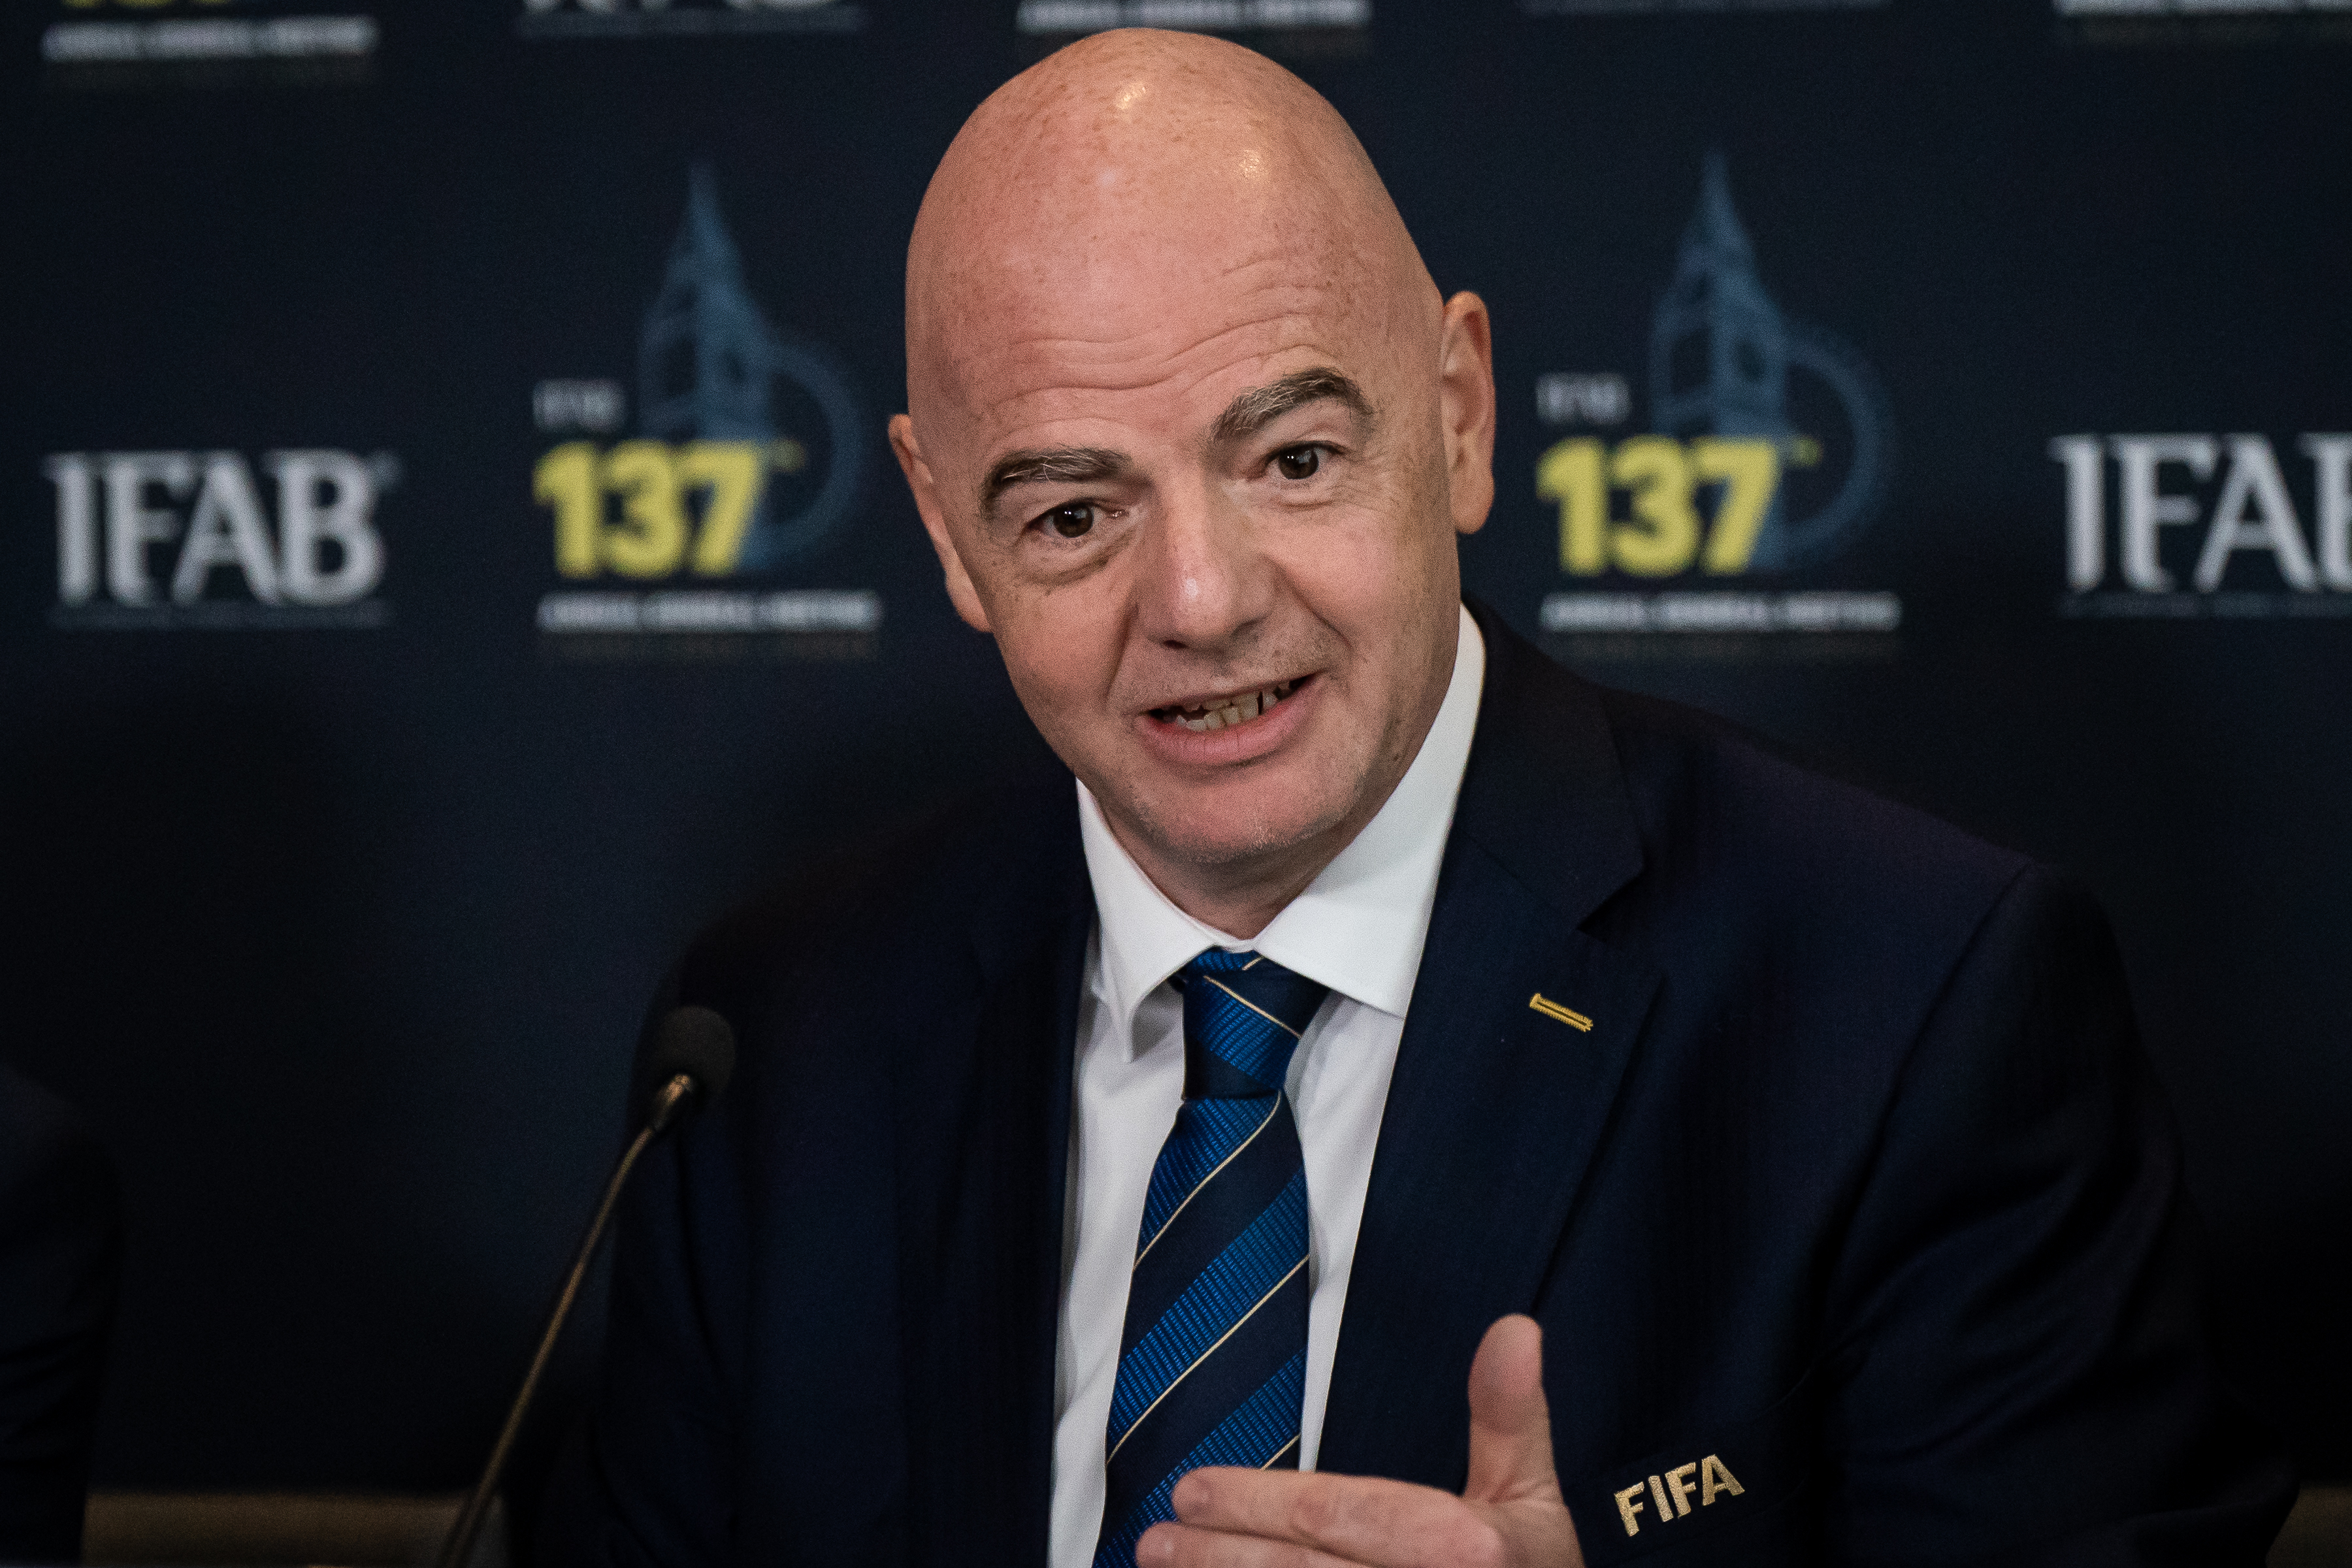 FIFA president Gianni Infantino has targeted equal prize money for men and women at the 2026 and 2027 World Cups